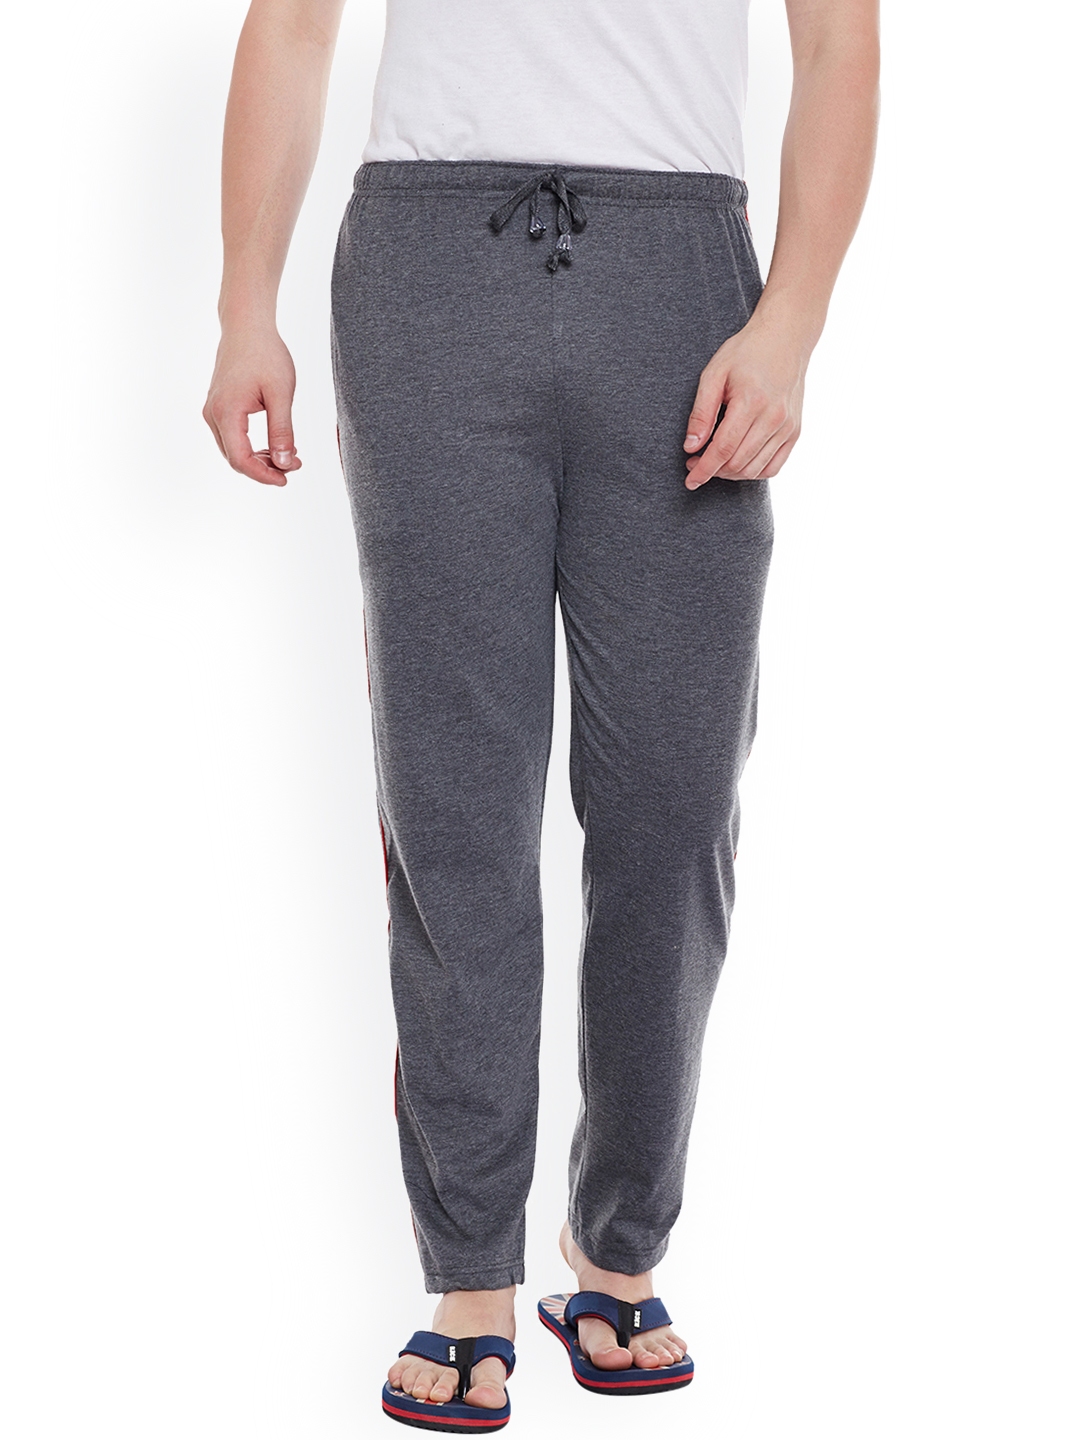 The 10 best men's lounge pants to wear all day long - The Manual